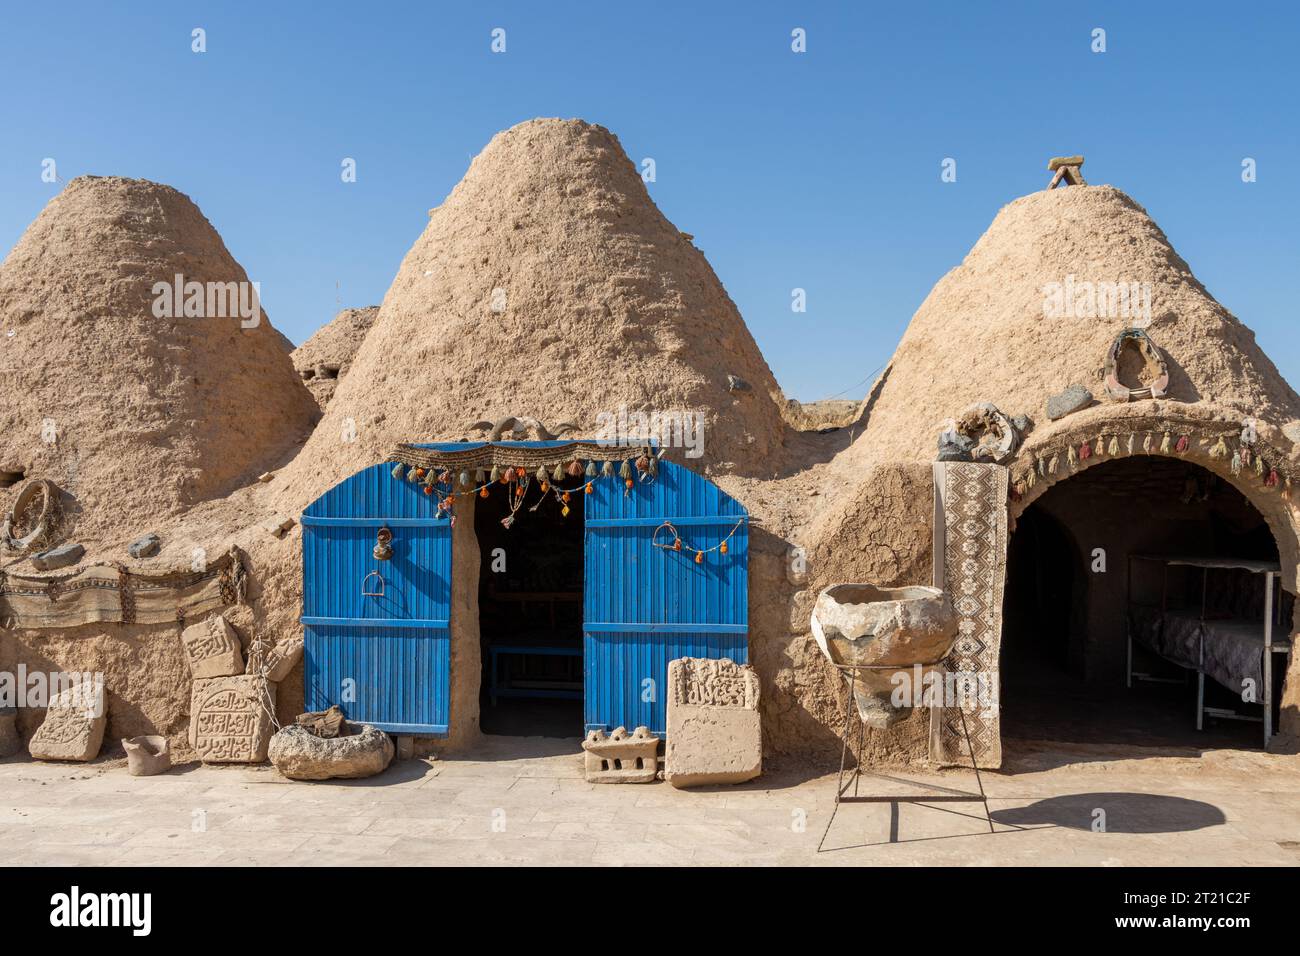 A beehive or tomb house is a building made from a circle of stones and mud topped with a domed roof. The name comes from the similarity in shape to a Stock Photo